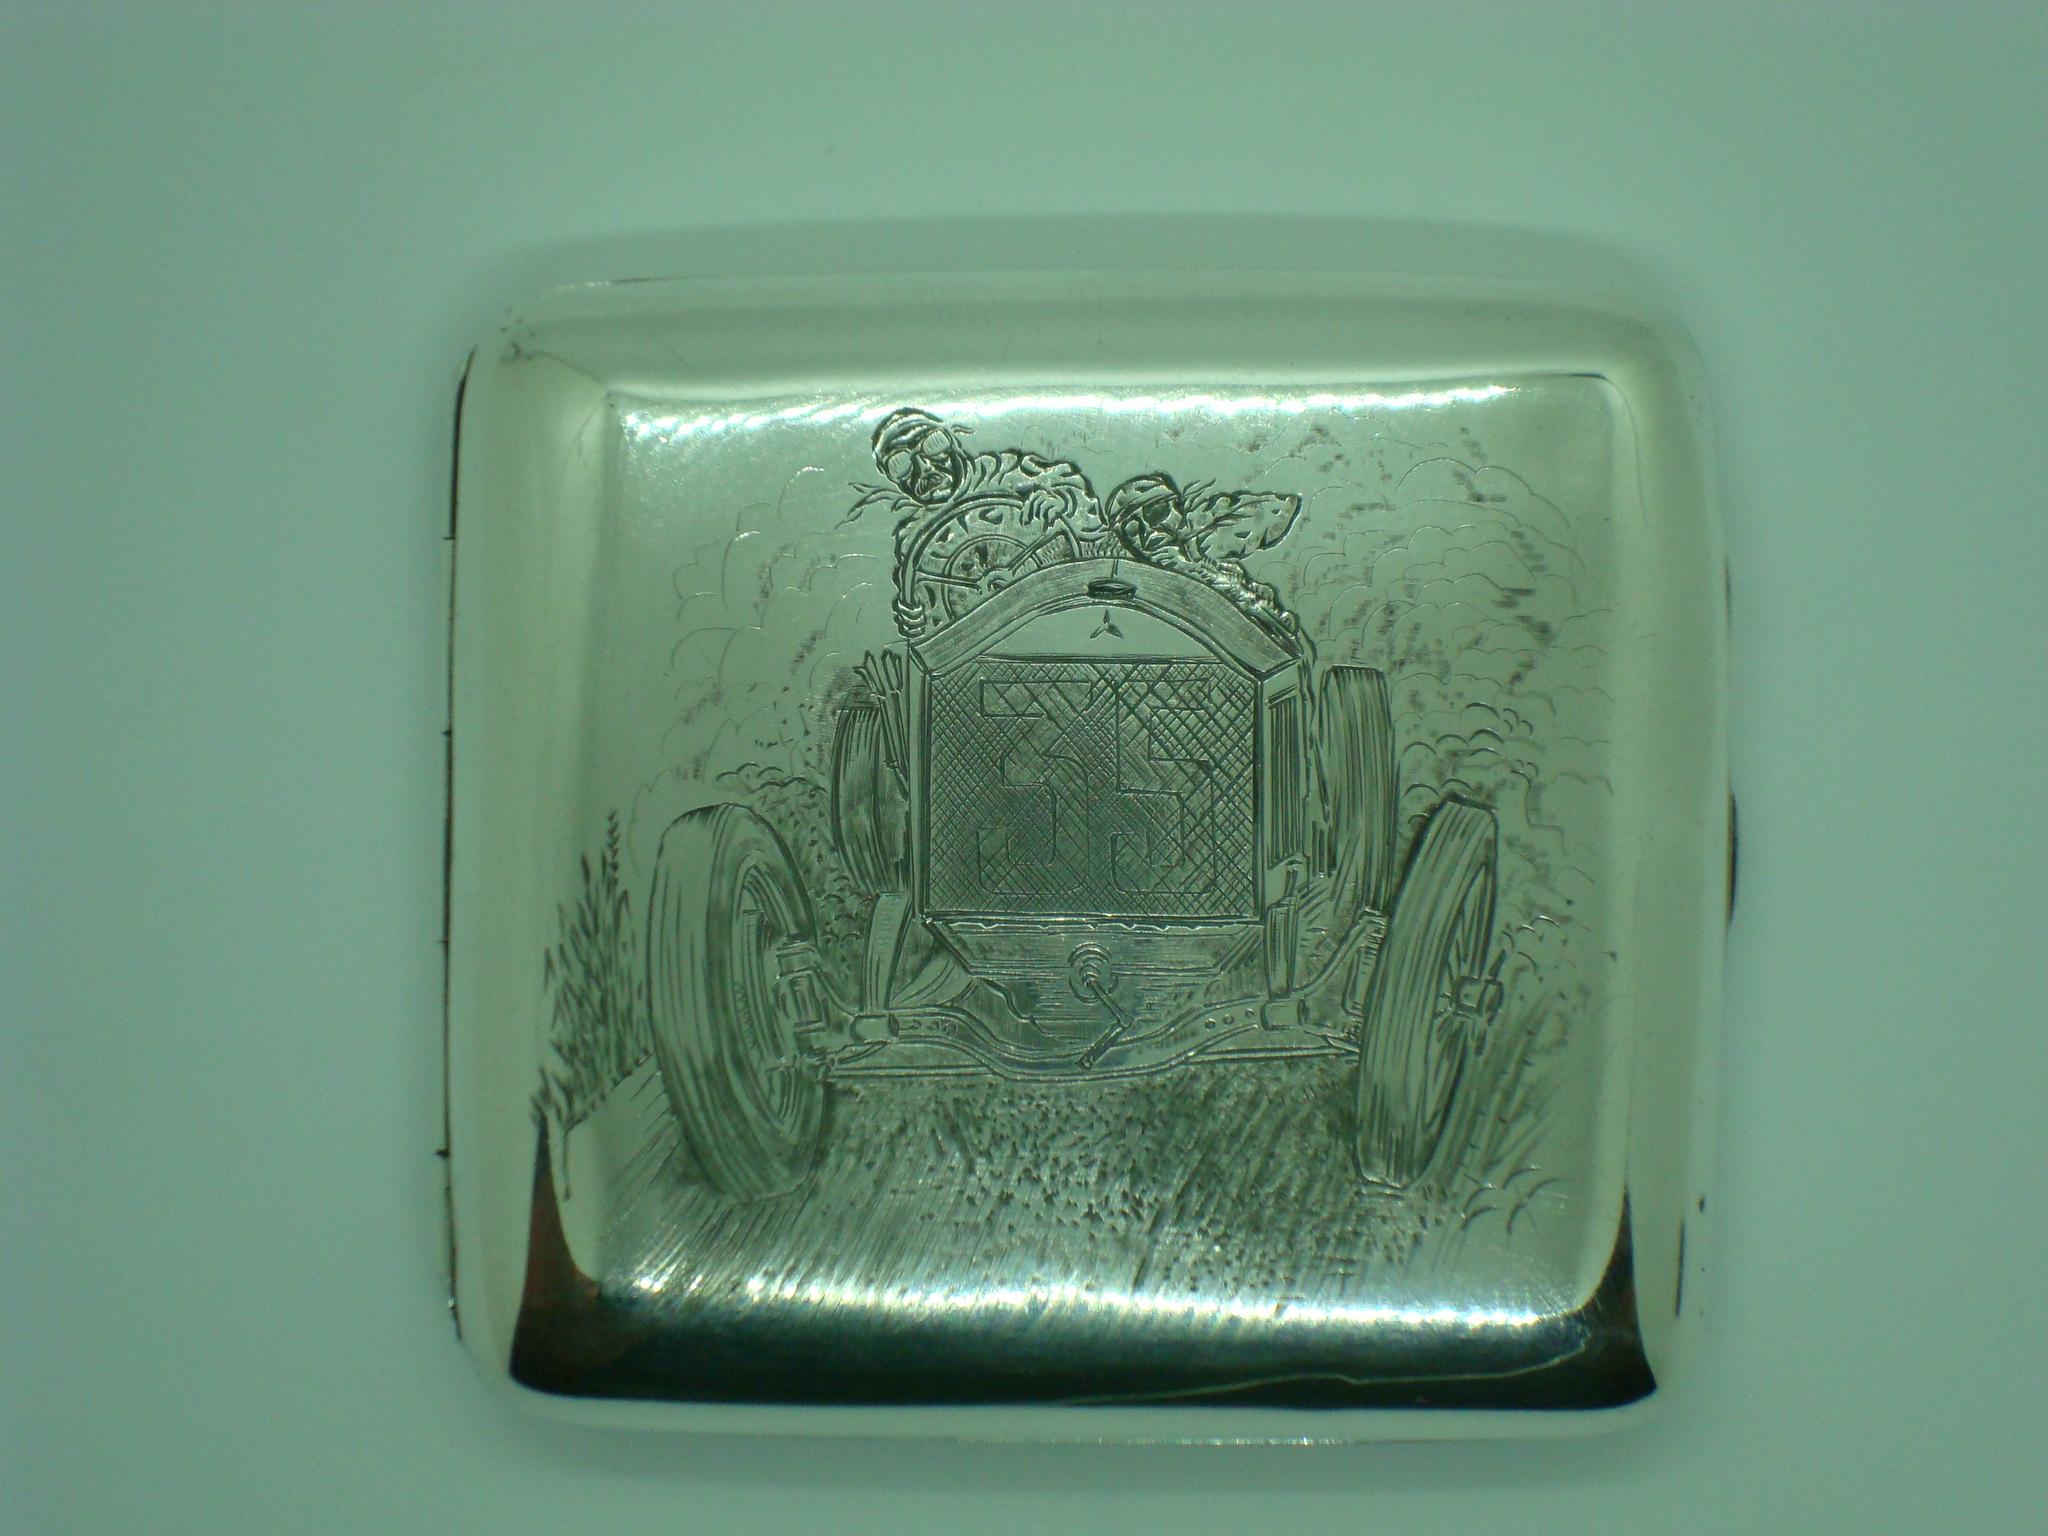 A magnificent and extremely rare sterling silver engraved cigarette case depicting a stylized Racing car. The car has the emblem of Mercedes Benz.
Marked UK Birmingham Sterling silver, Henry Clifford Davis 1918.
A beautiful and exceptionally rare